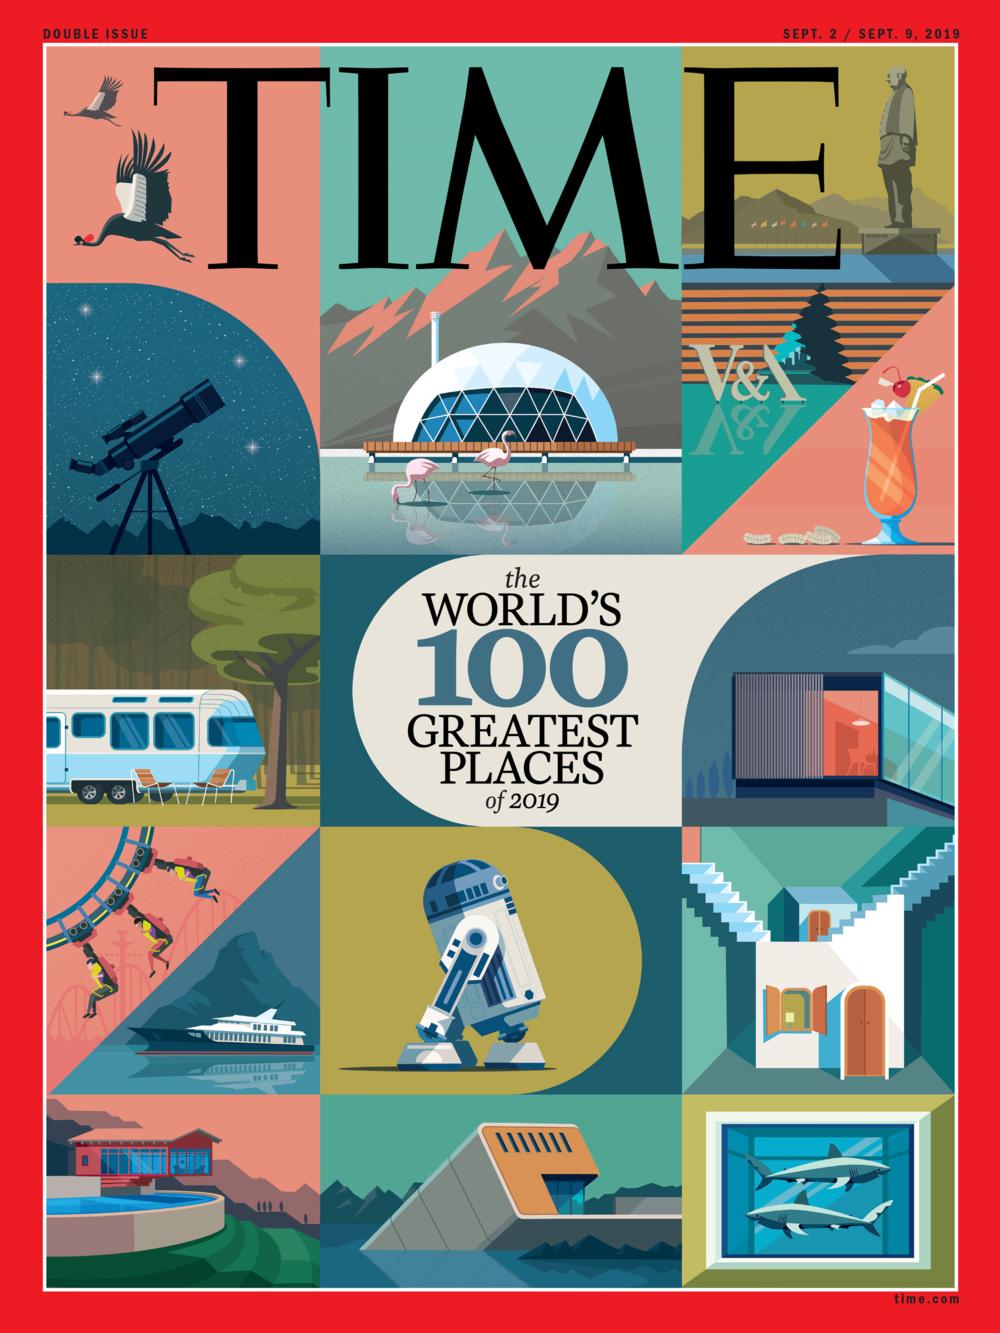 NCC Named on Time Magazine's List of World Greatest Places Chautauqua Today